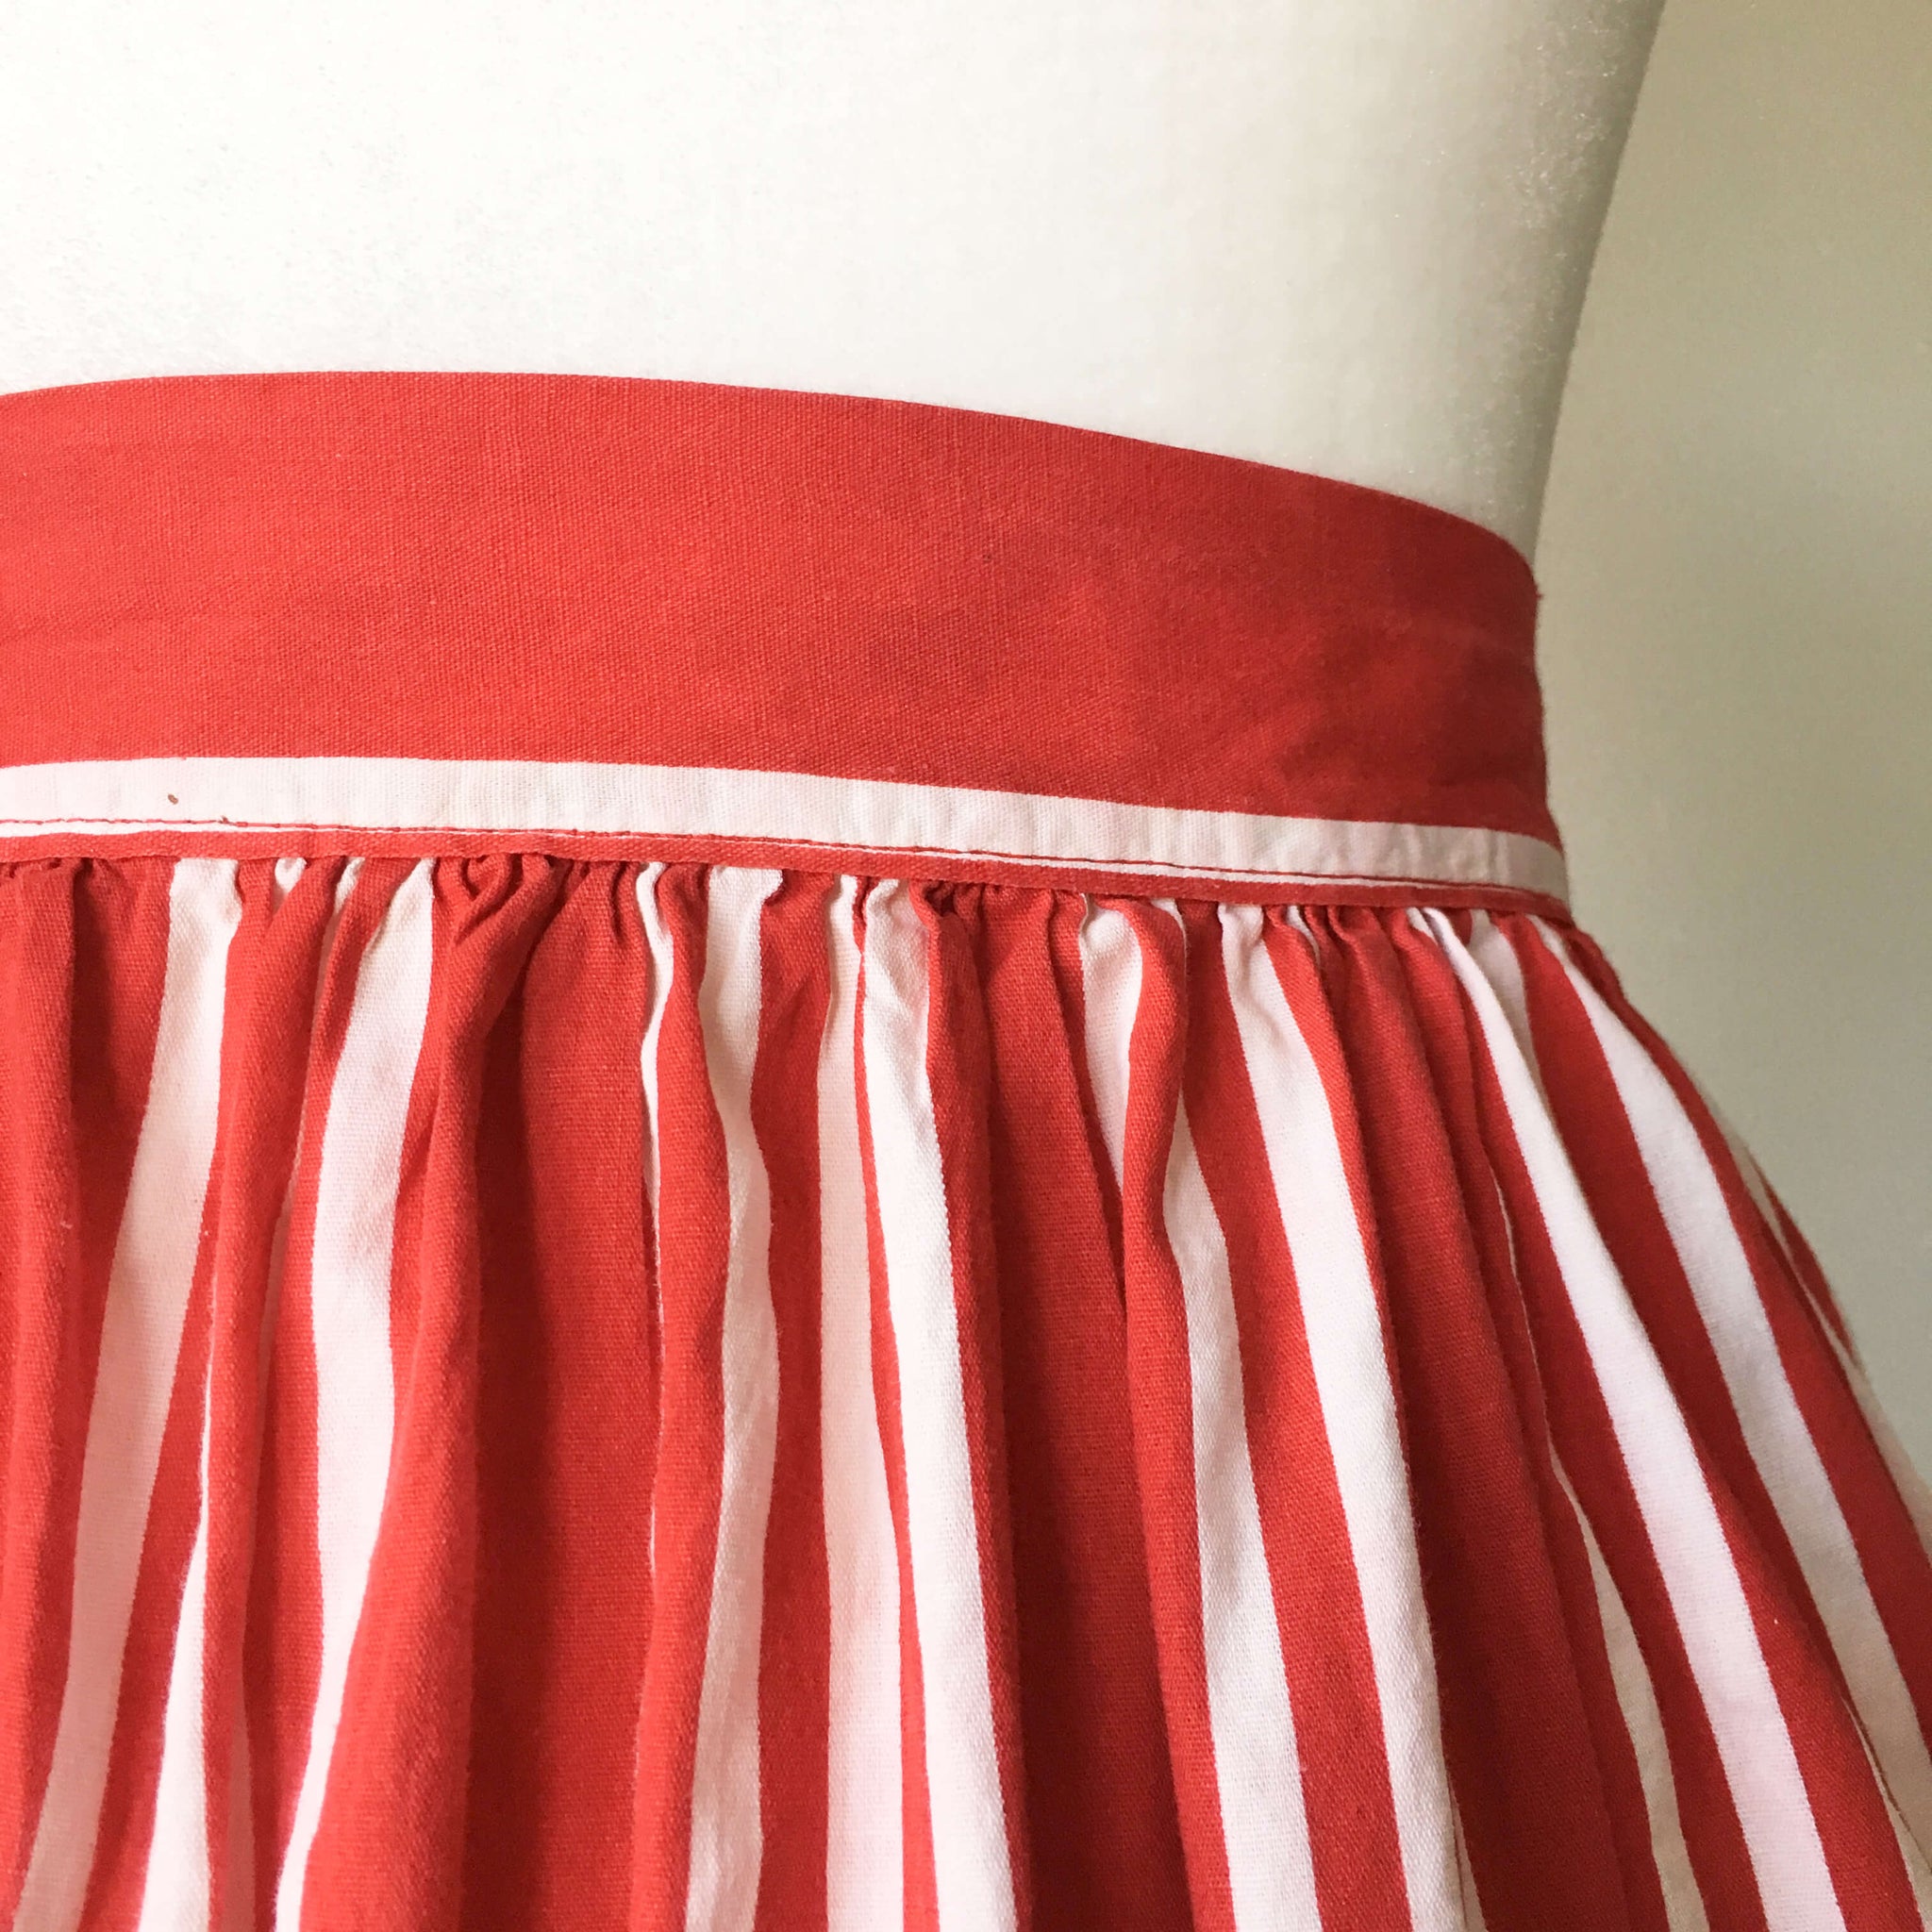 Vintage Red and White Striped Half Apron for Egg Gathering and Vegetable Harvest